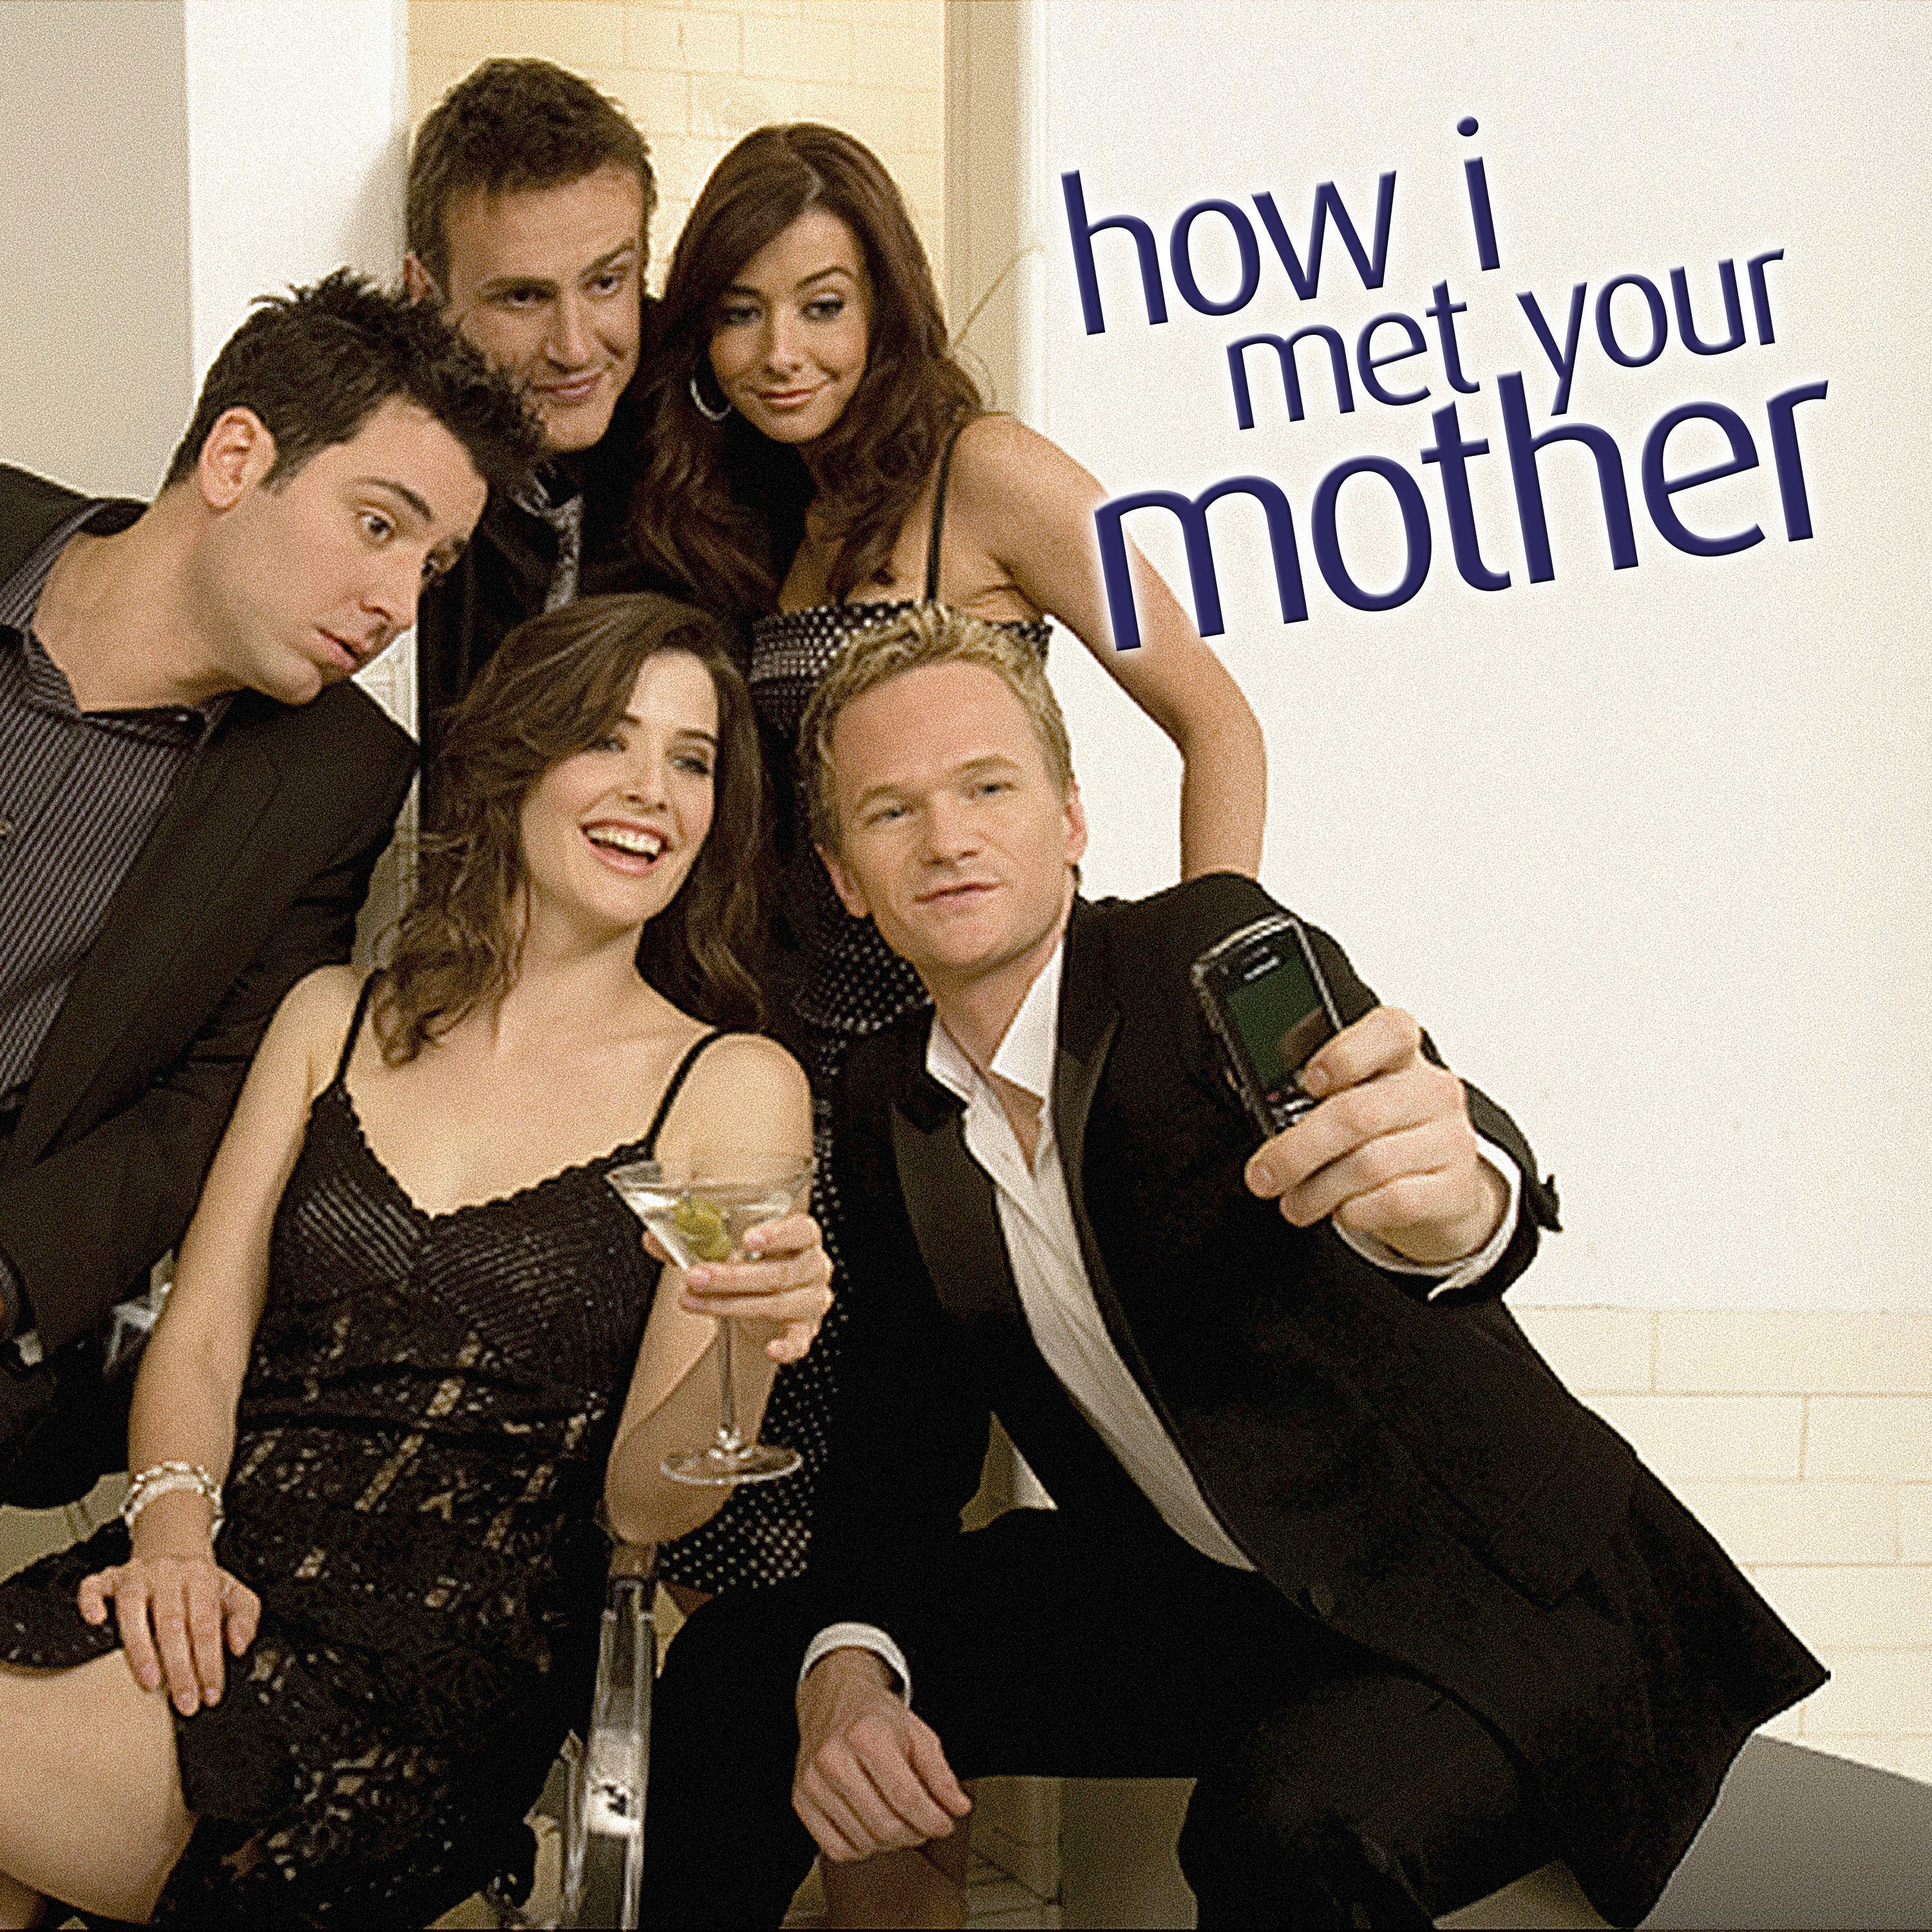 Bs.To How I Met Your Mother